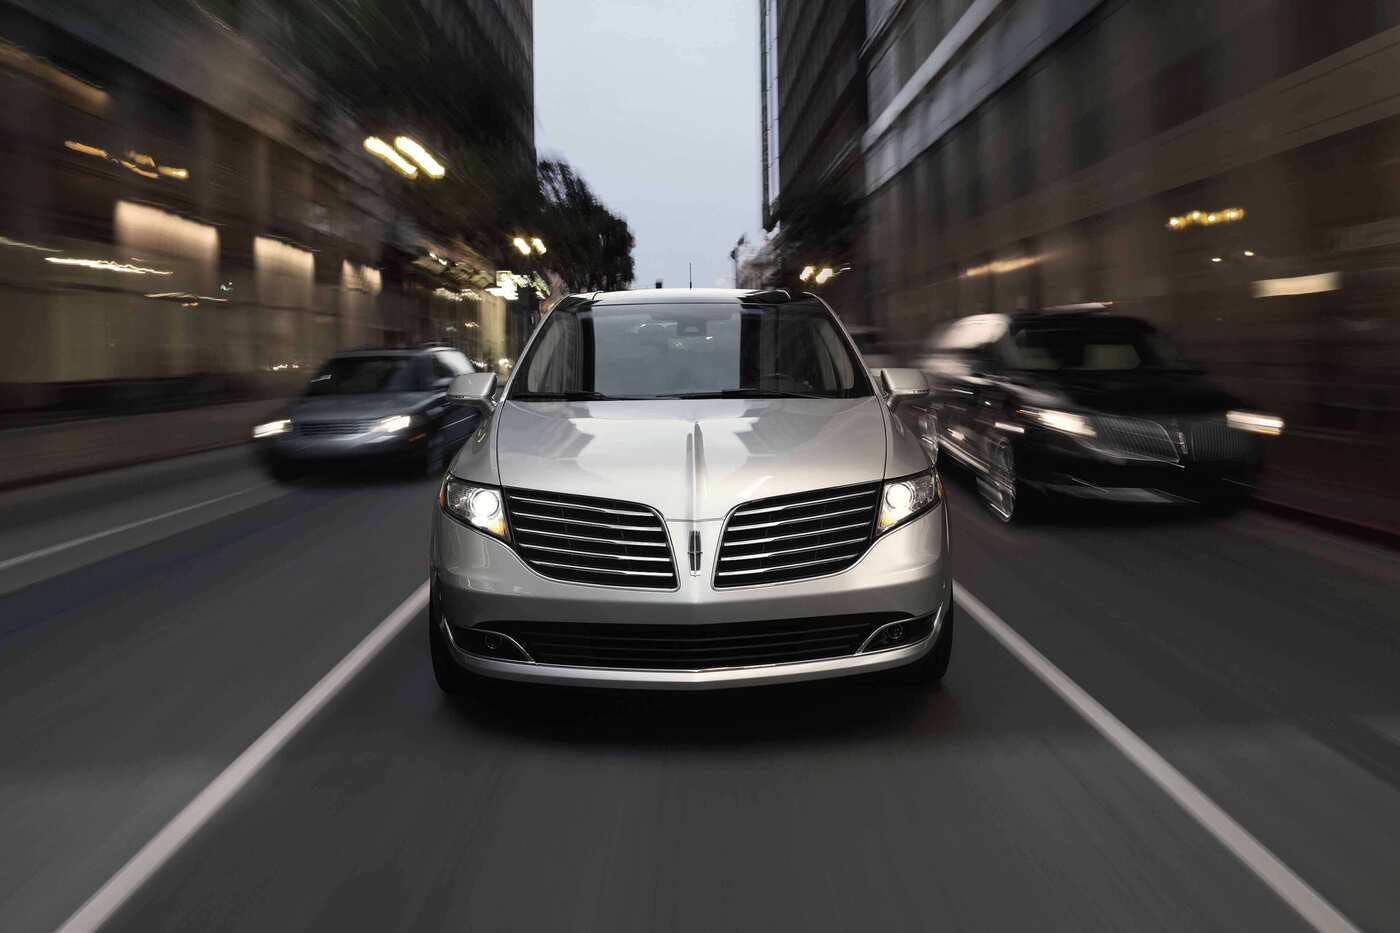 2019 Lincoln Mkt Comparisons Reviews Pictures Truecar